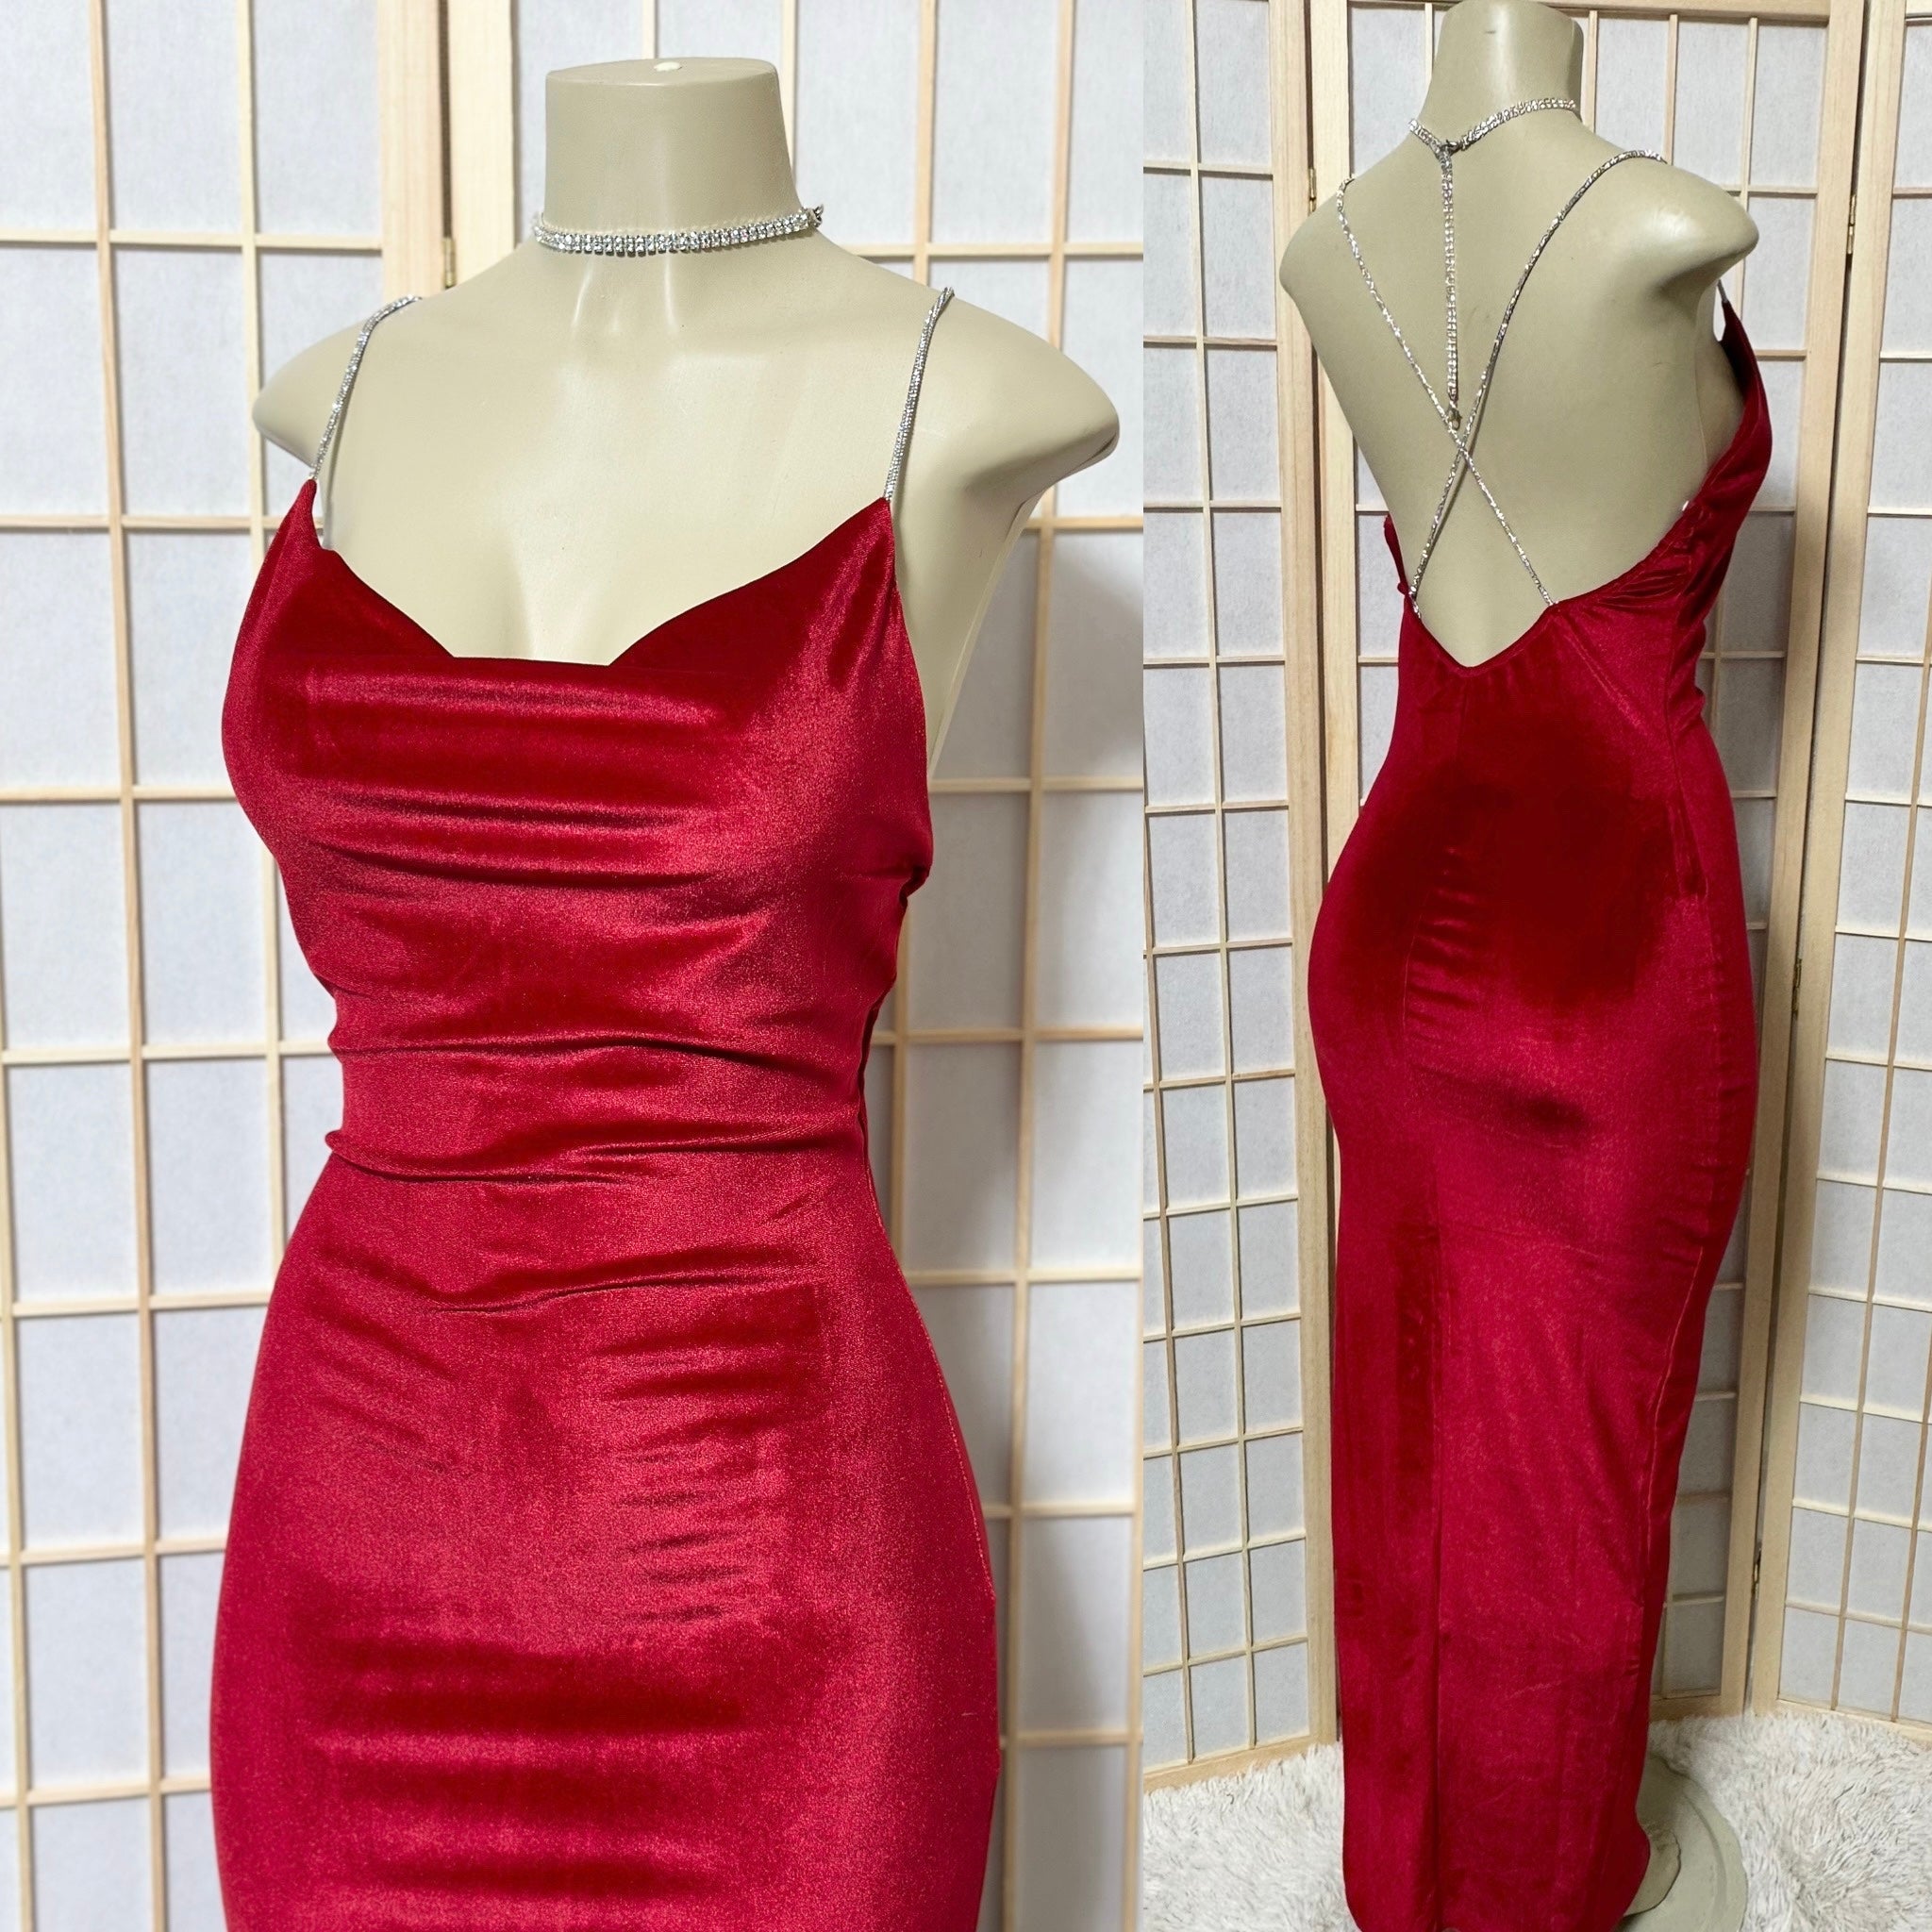 The “Elevated Glam” Velvet Gown In Red